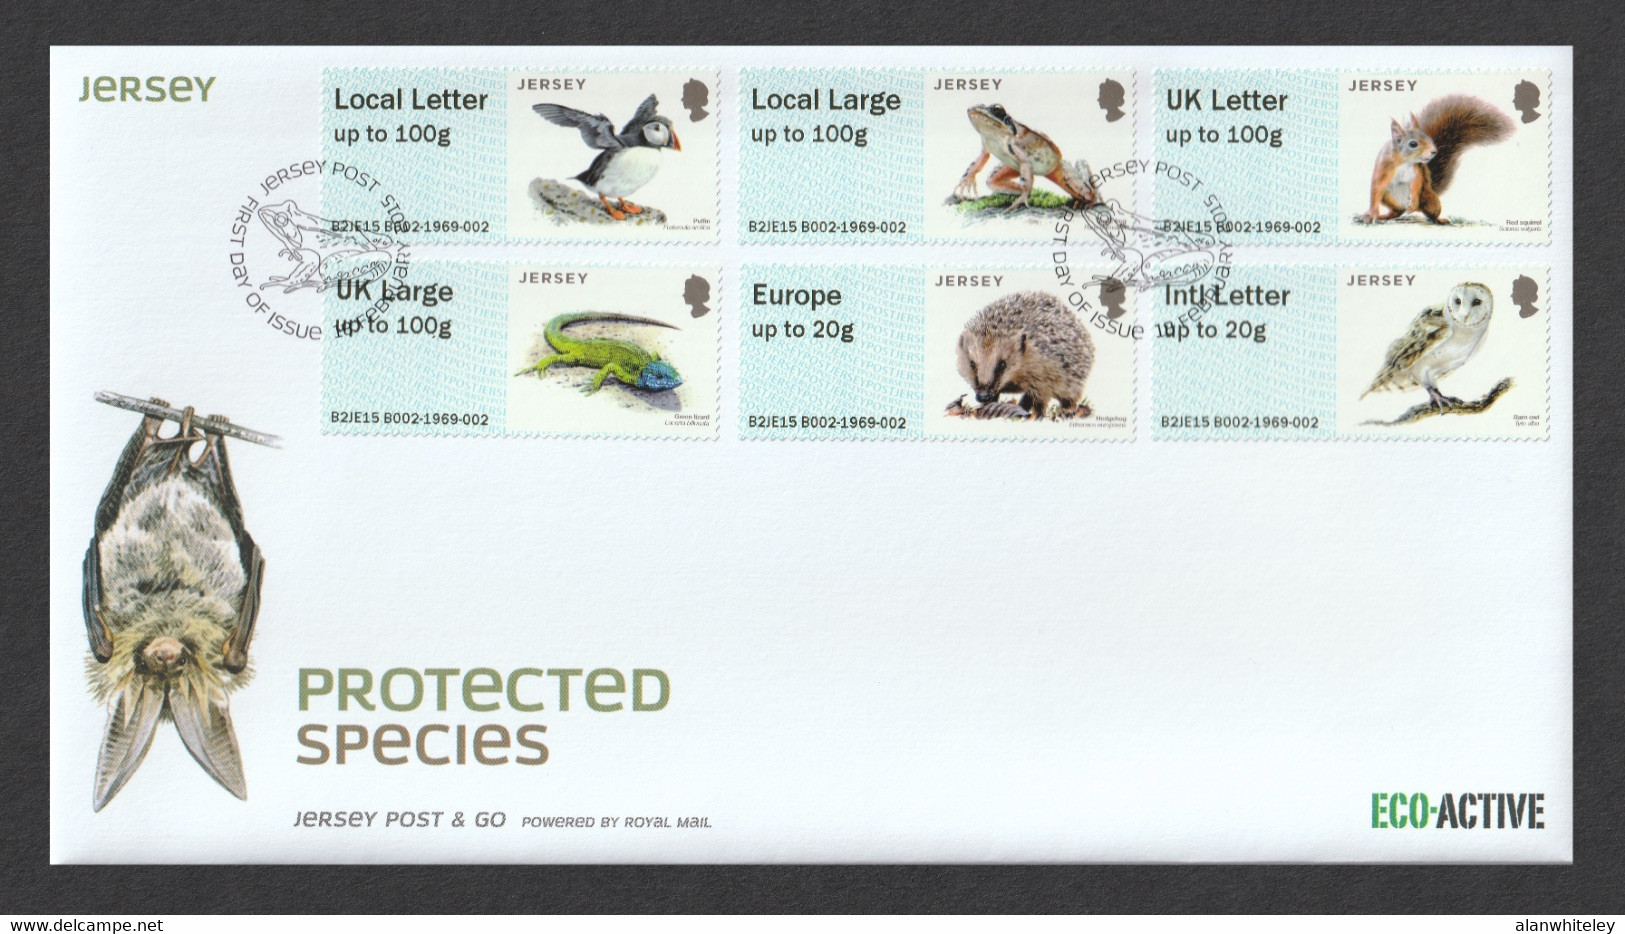 JERSEY 2015 Post & Go (Protected Species): First Day Cover CANCELLED - Jersey